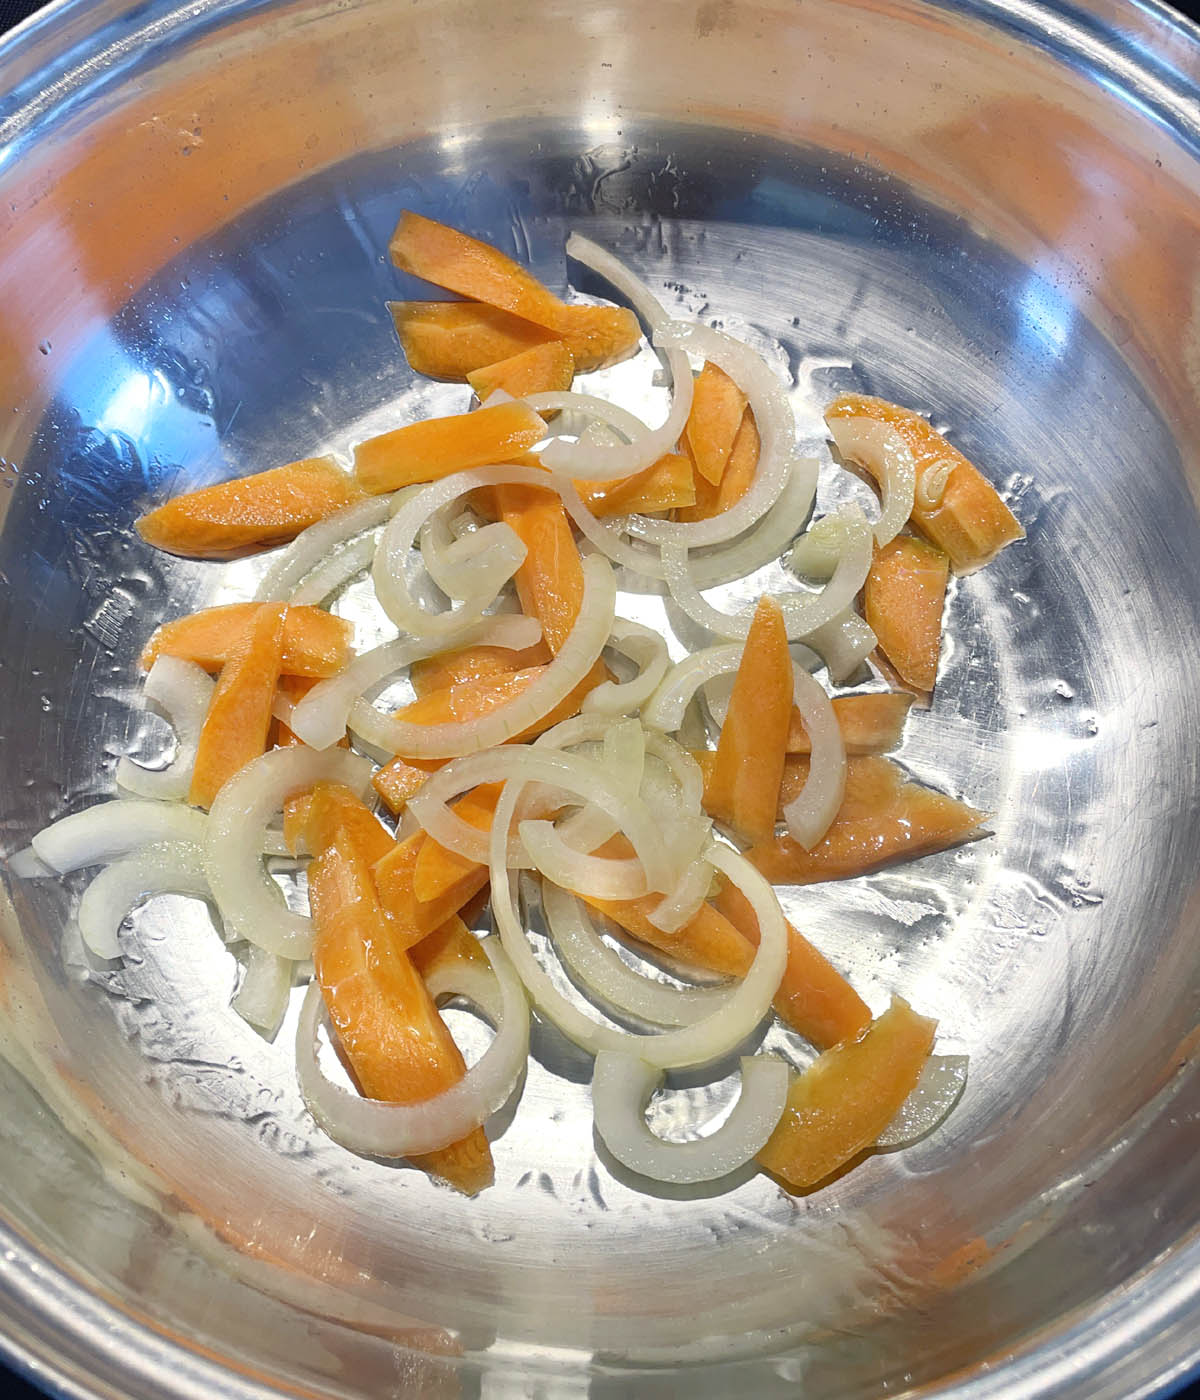 Sliced carrots and onions in a metal wok.